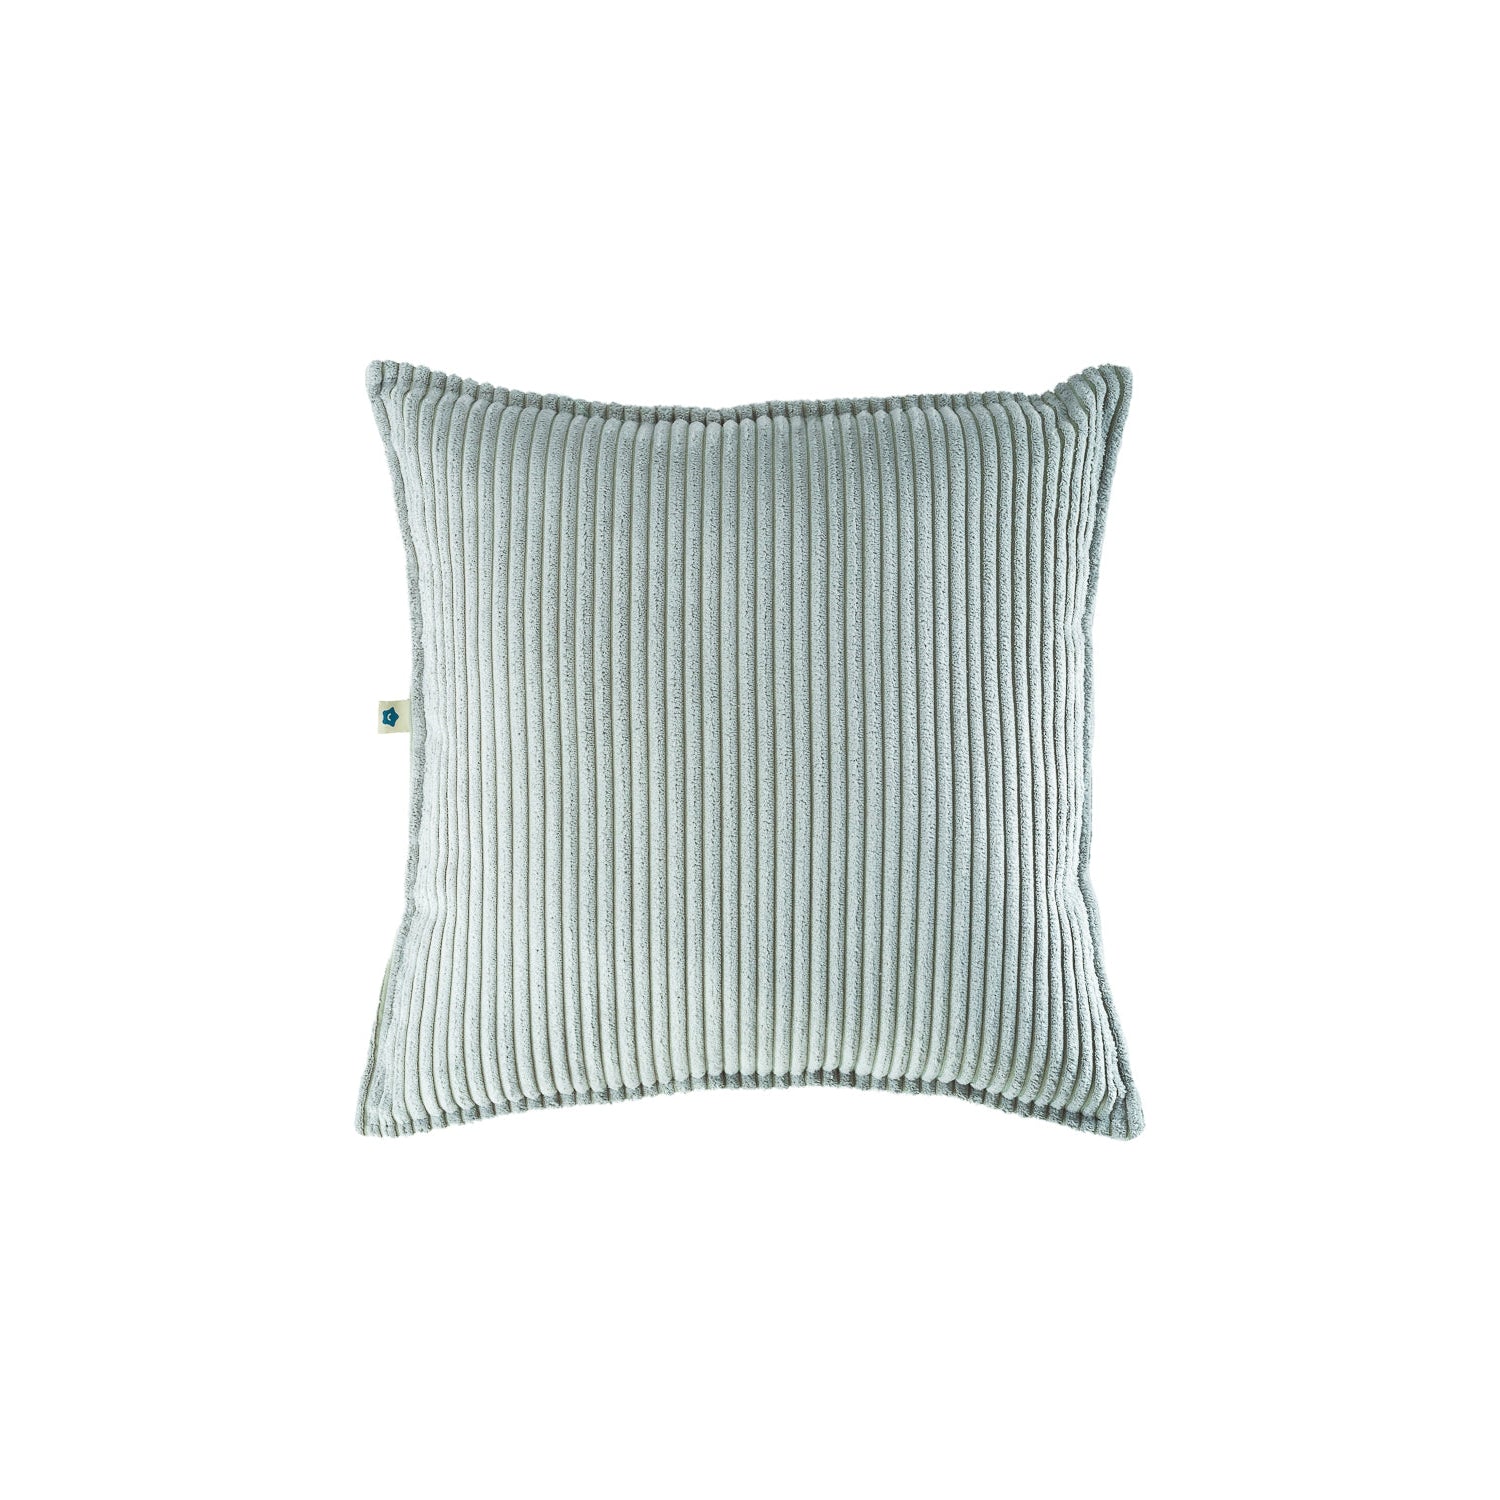 Wigiwama Peppermint Green Block Cushion at Rugs by Roo